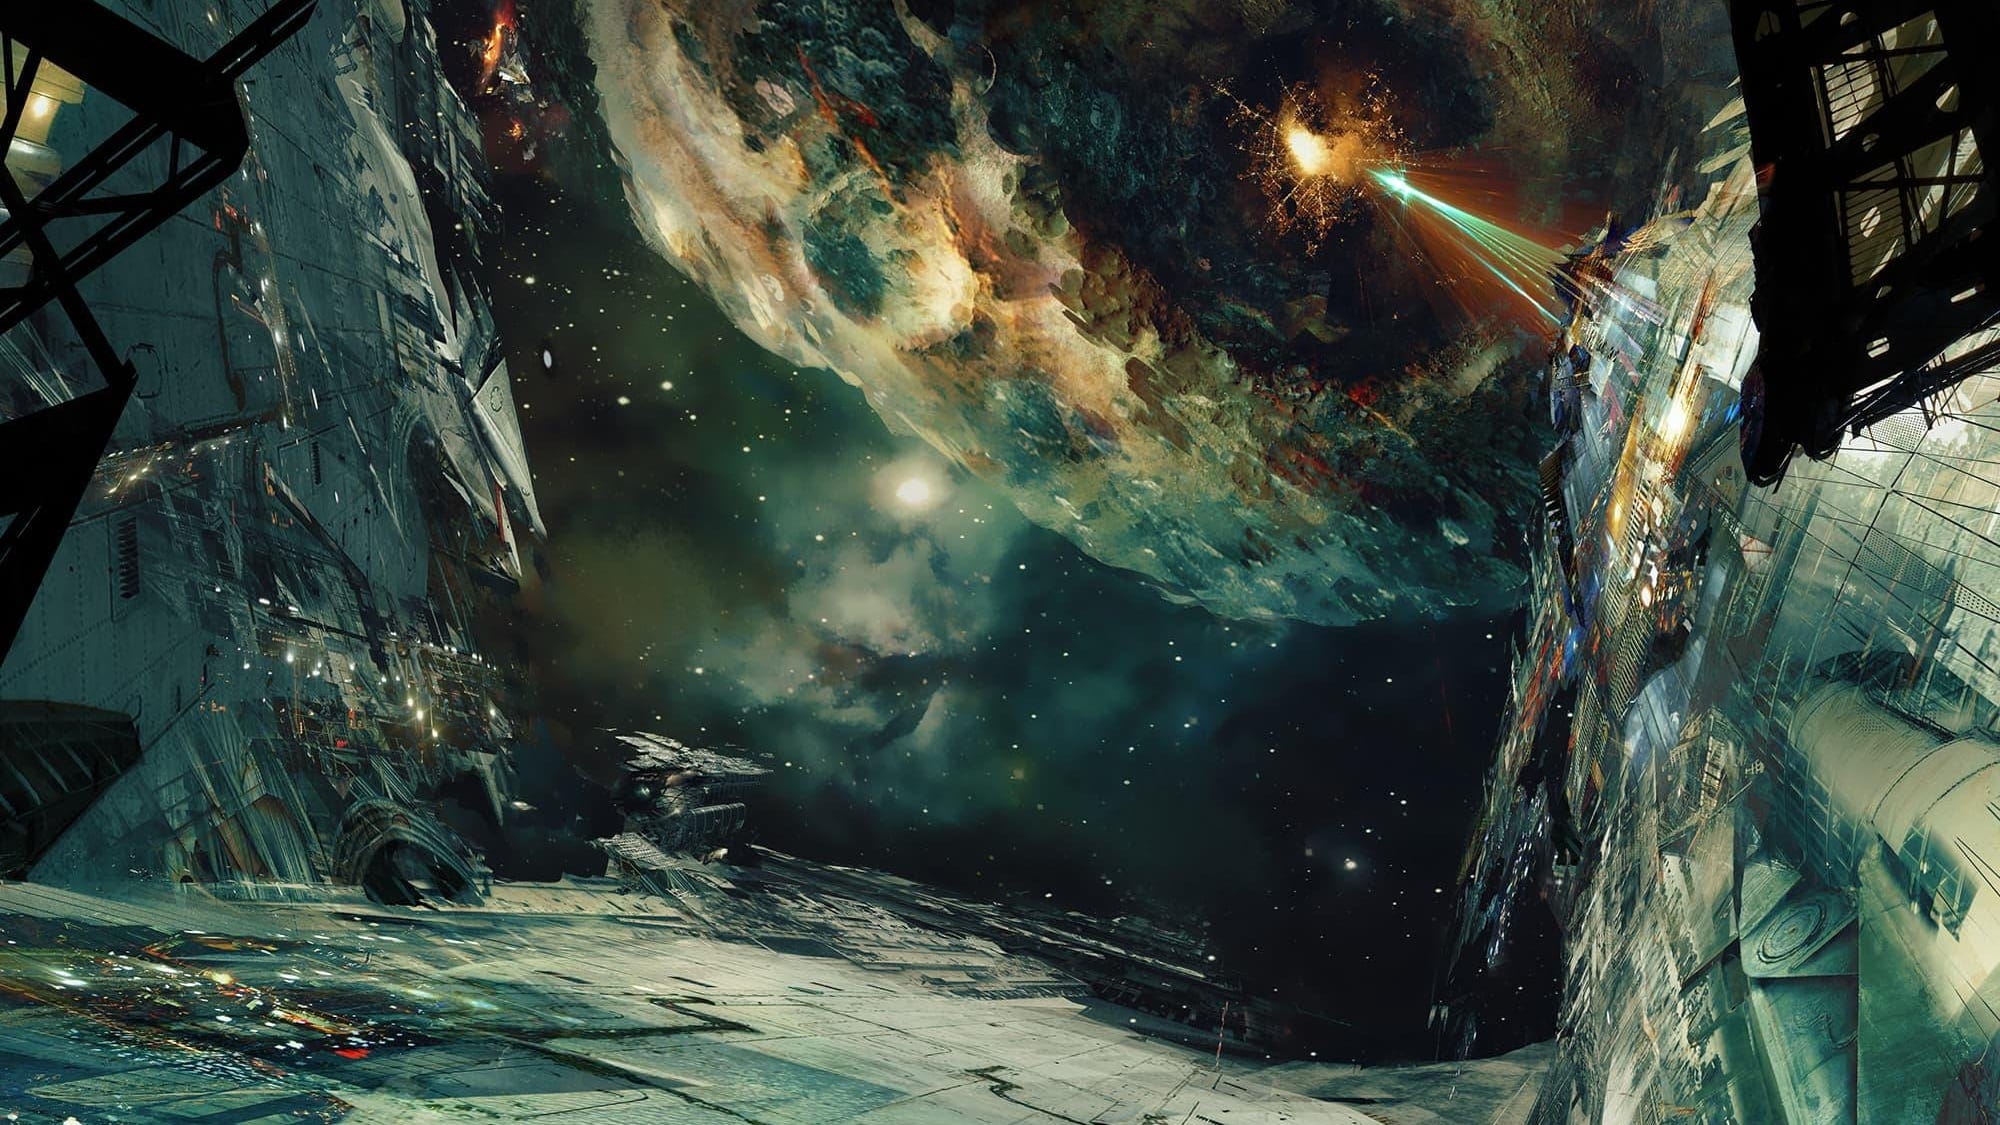 Artwork for The Expanse depicting a spaceship shooting an energy beam at an asteroid